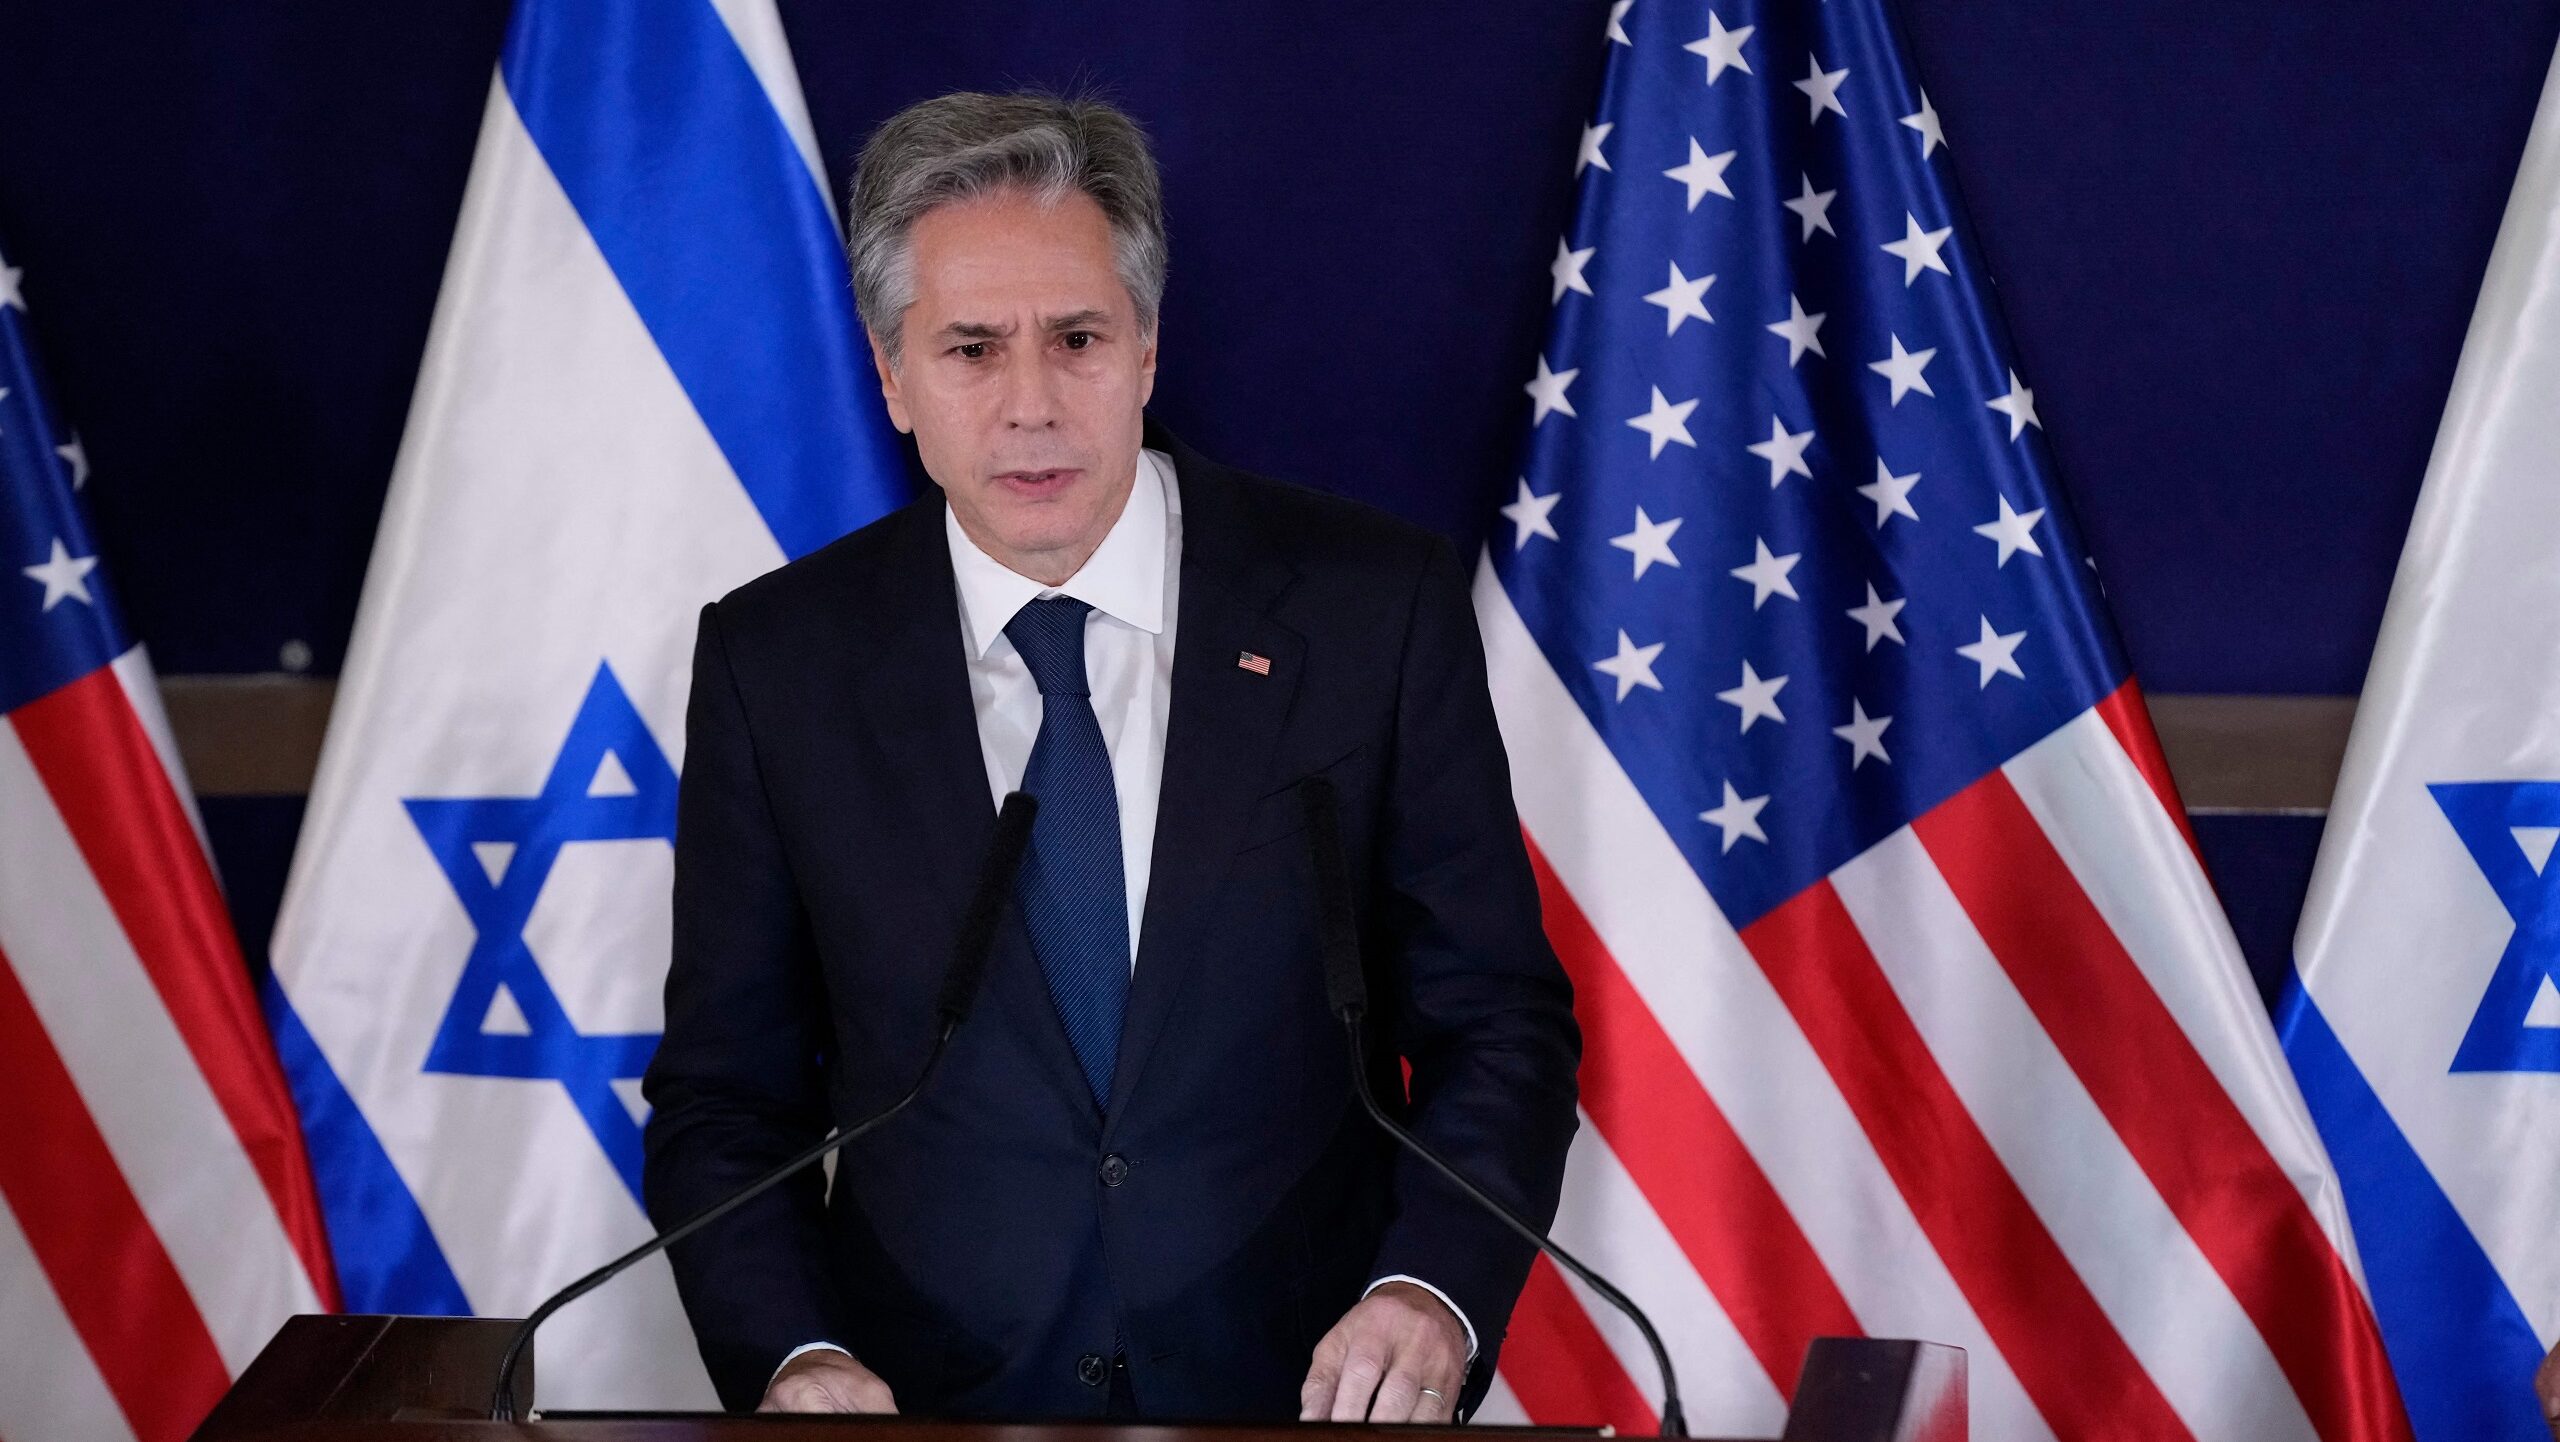 Blinken: ‘The United States Stands With Israel and With Its People Today, Tomorrow, Every Day’